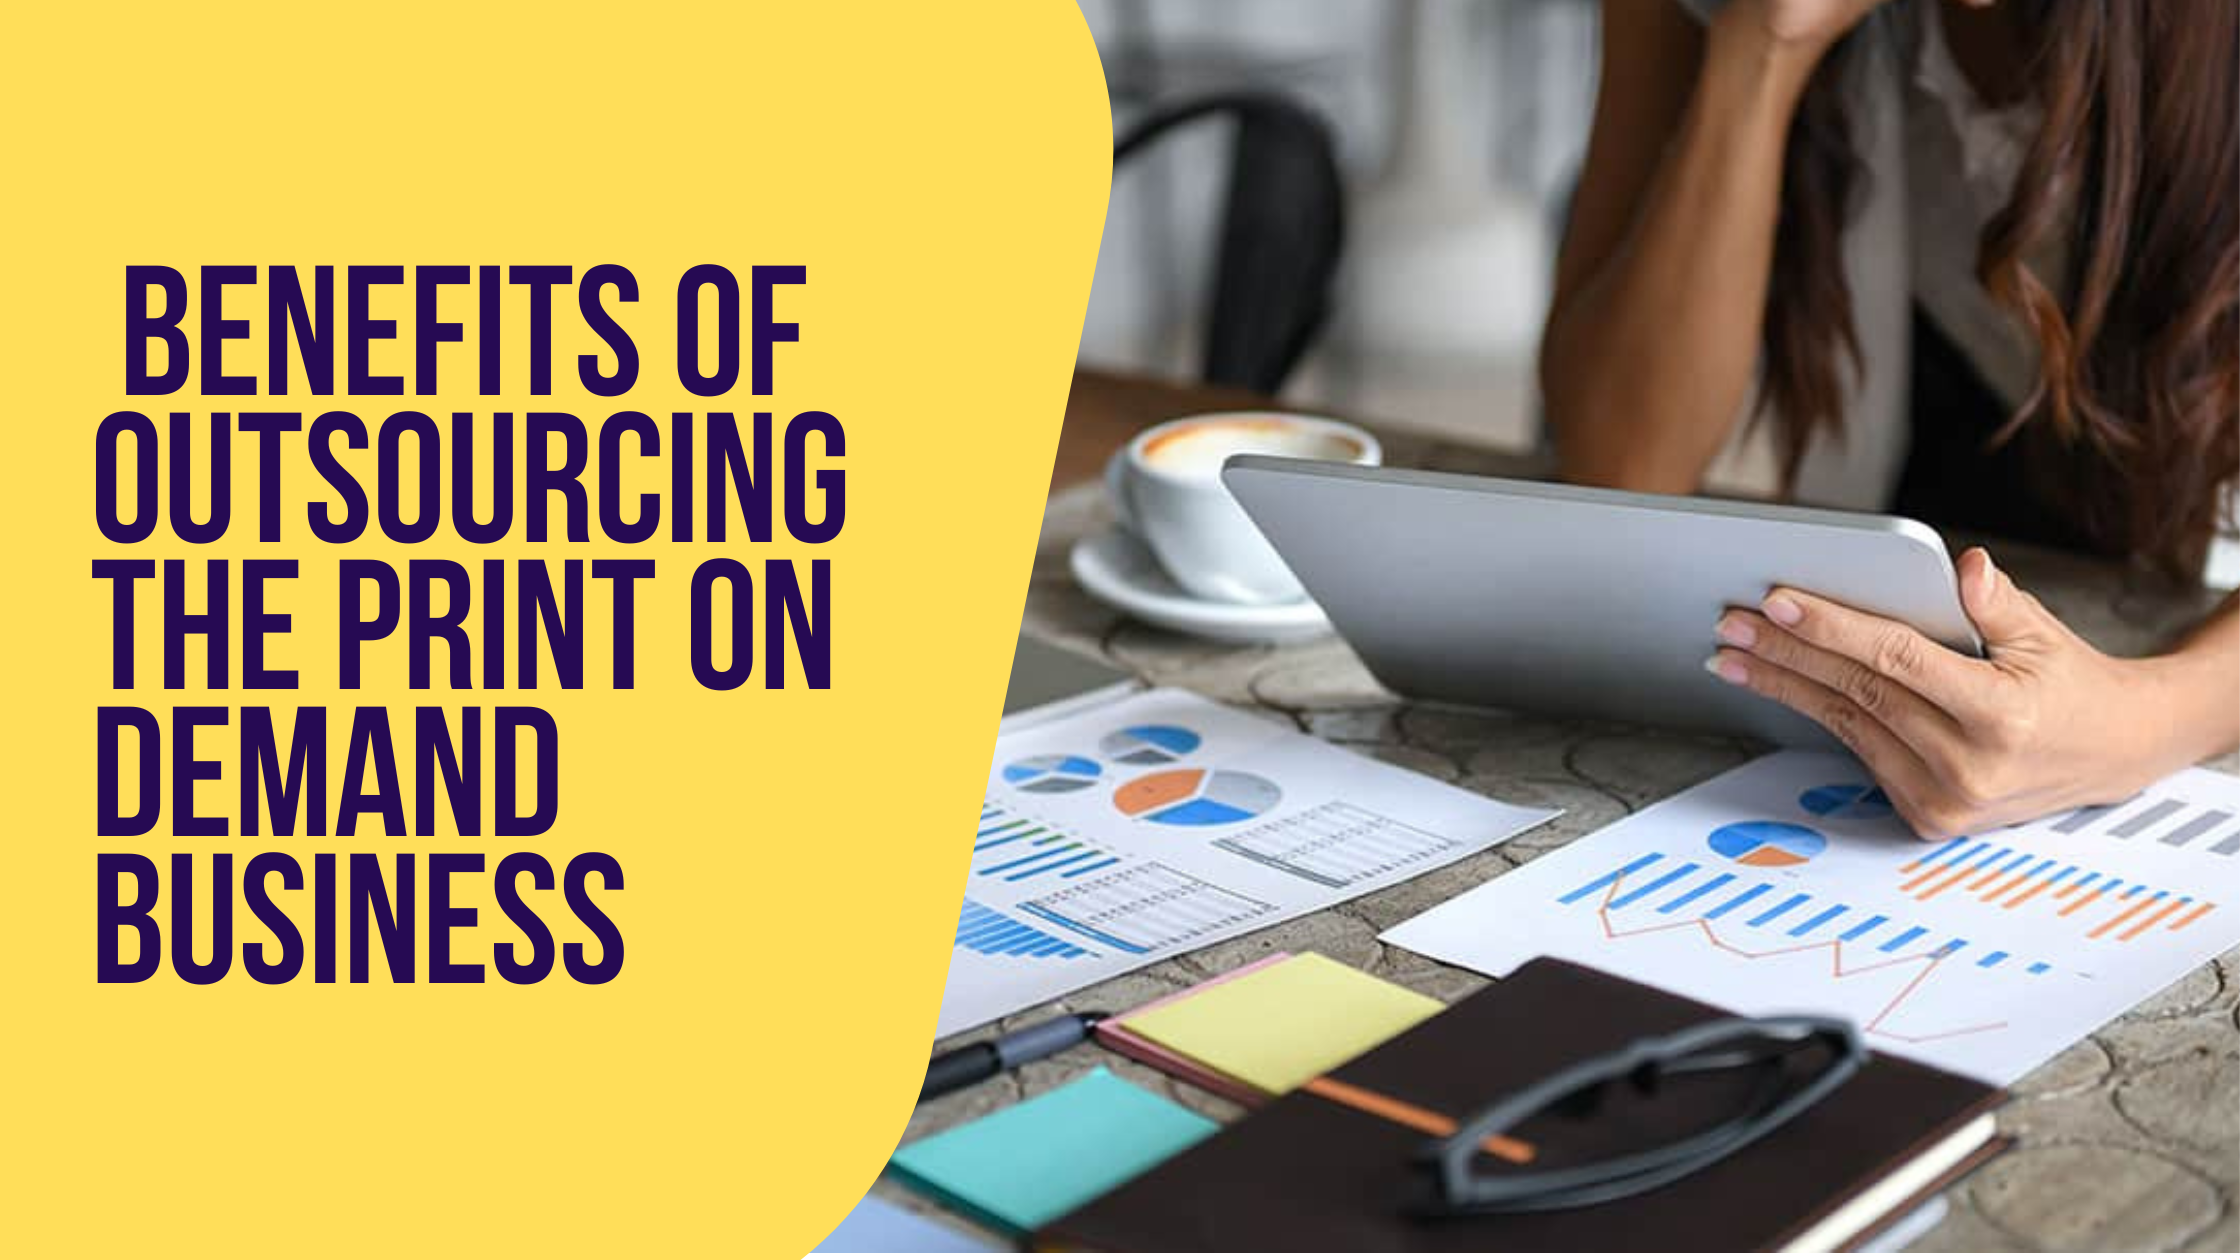 The Benefits of Outsourcing Your Print on Demand Business